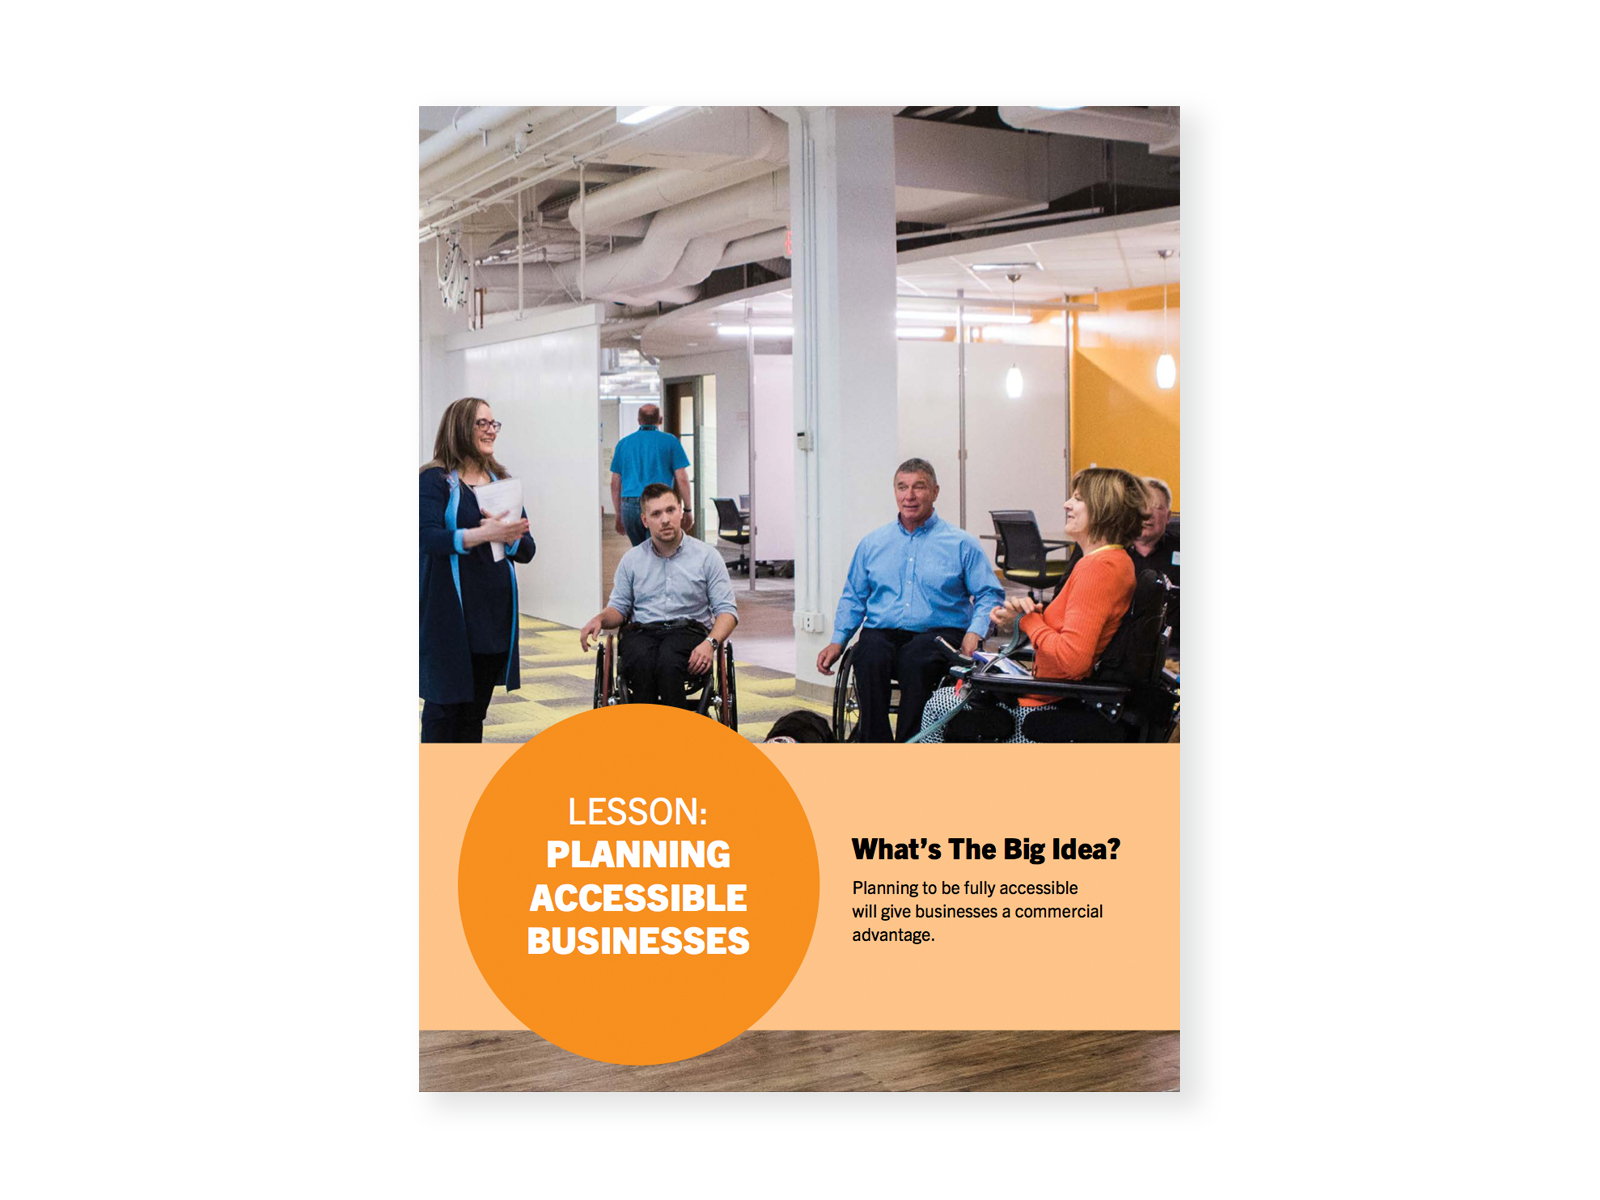 Rick Hansen, another man in a wheelchair, a woman in a power wheelchair, and a woman that is standing, gathered in a open-space accessible work space. Cover for "Planning Accessible Businesses" lesson.